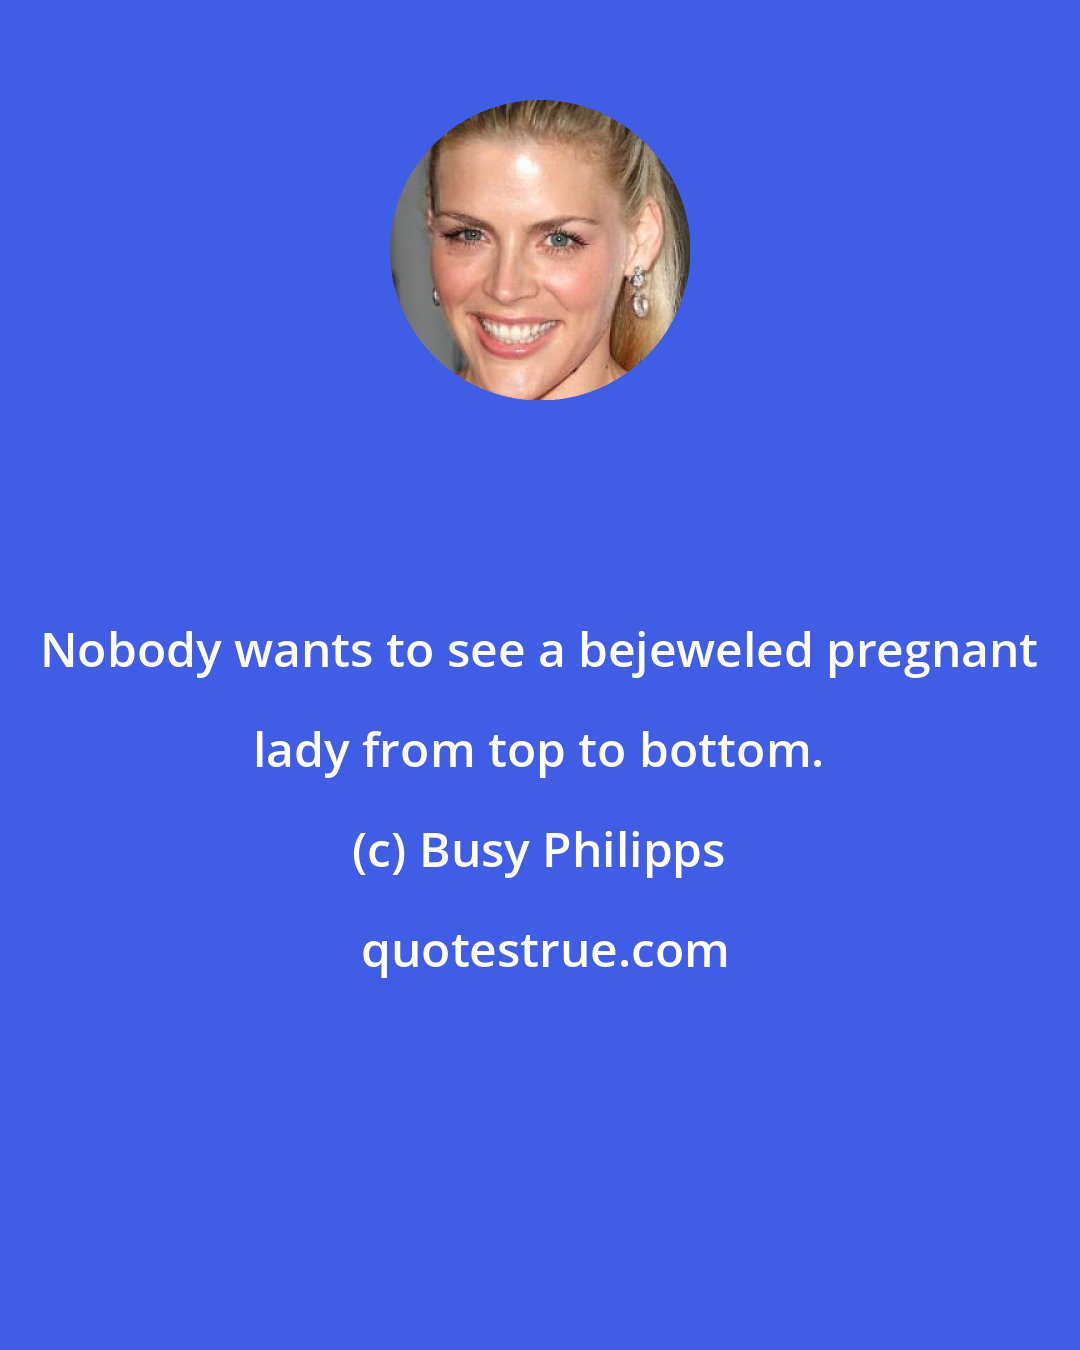 Busy Philipps: Nobody wants to see a bejeweled pregnant lady from top to bottom.